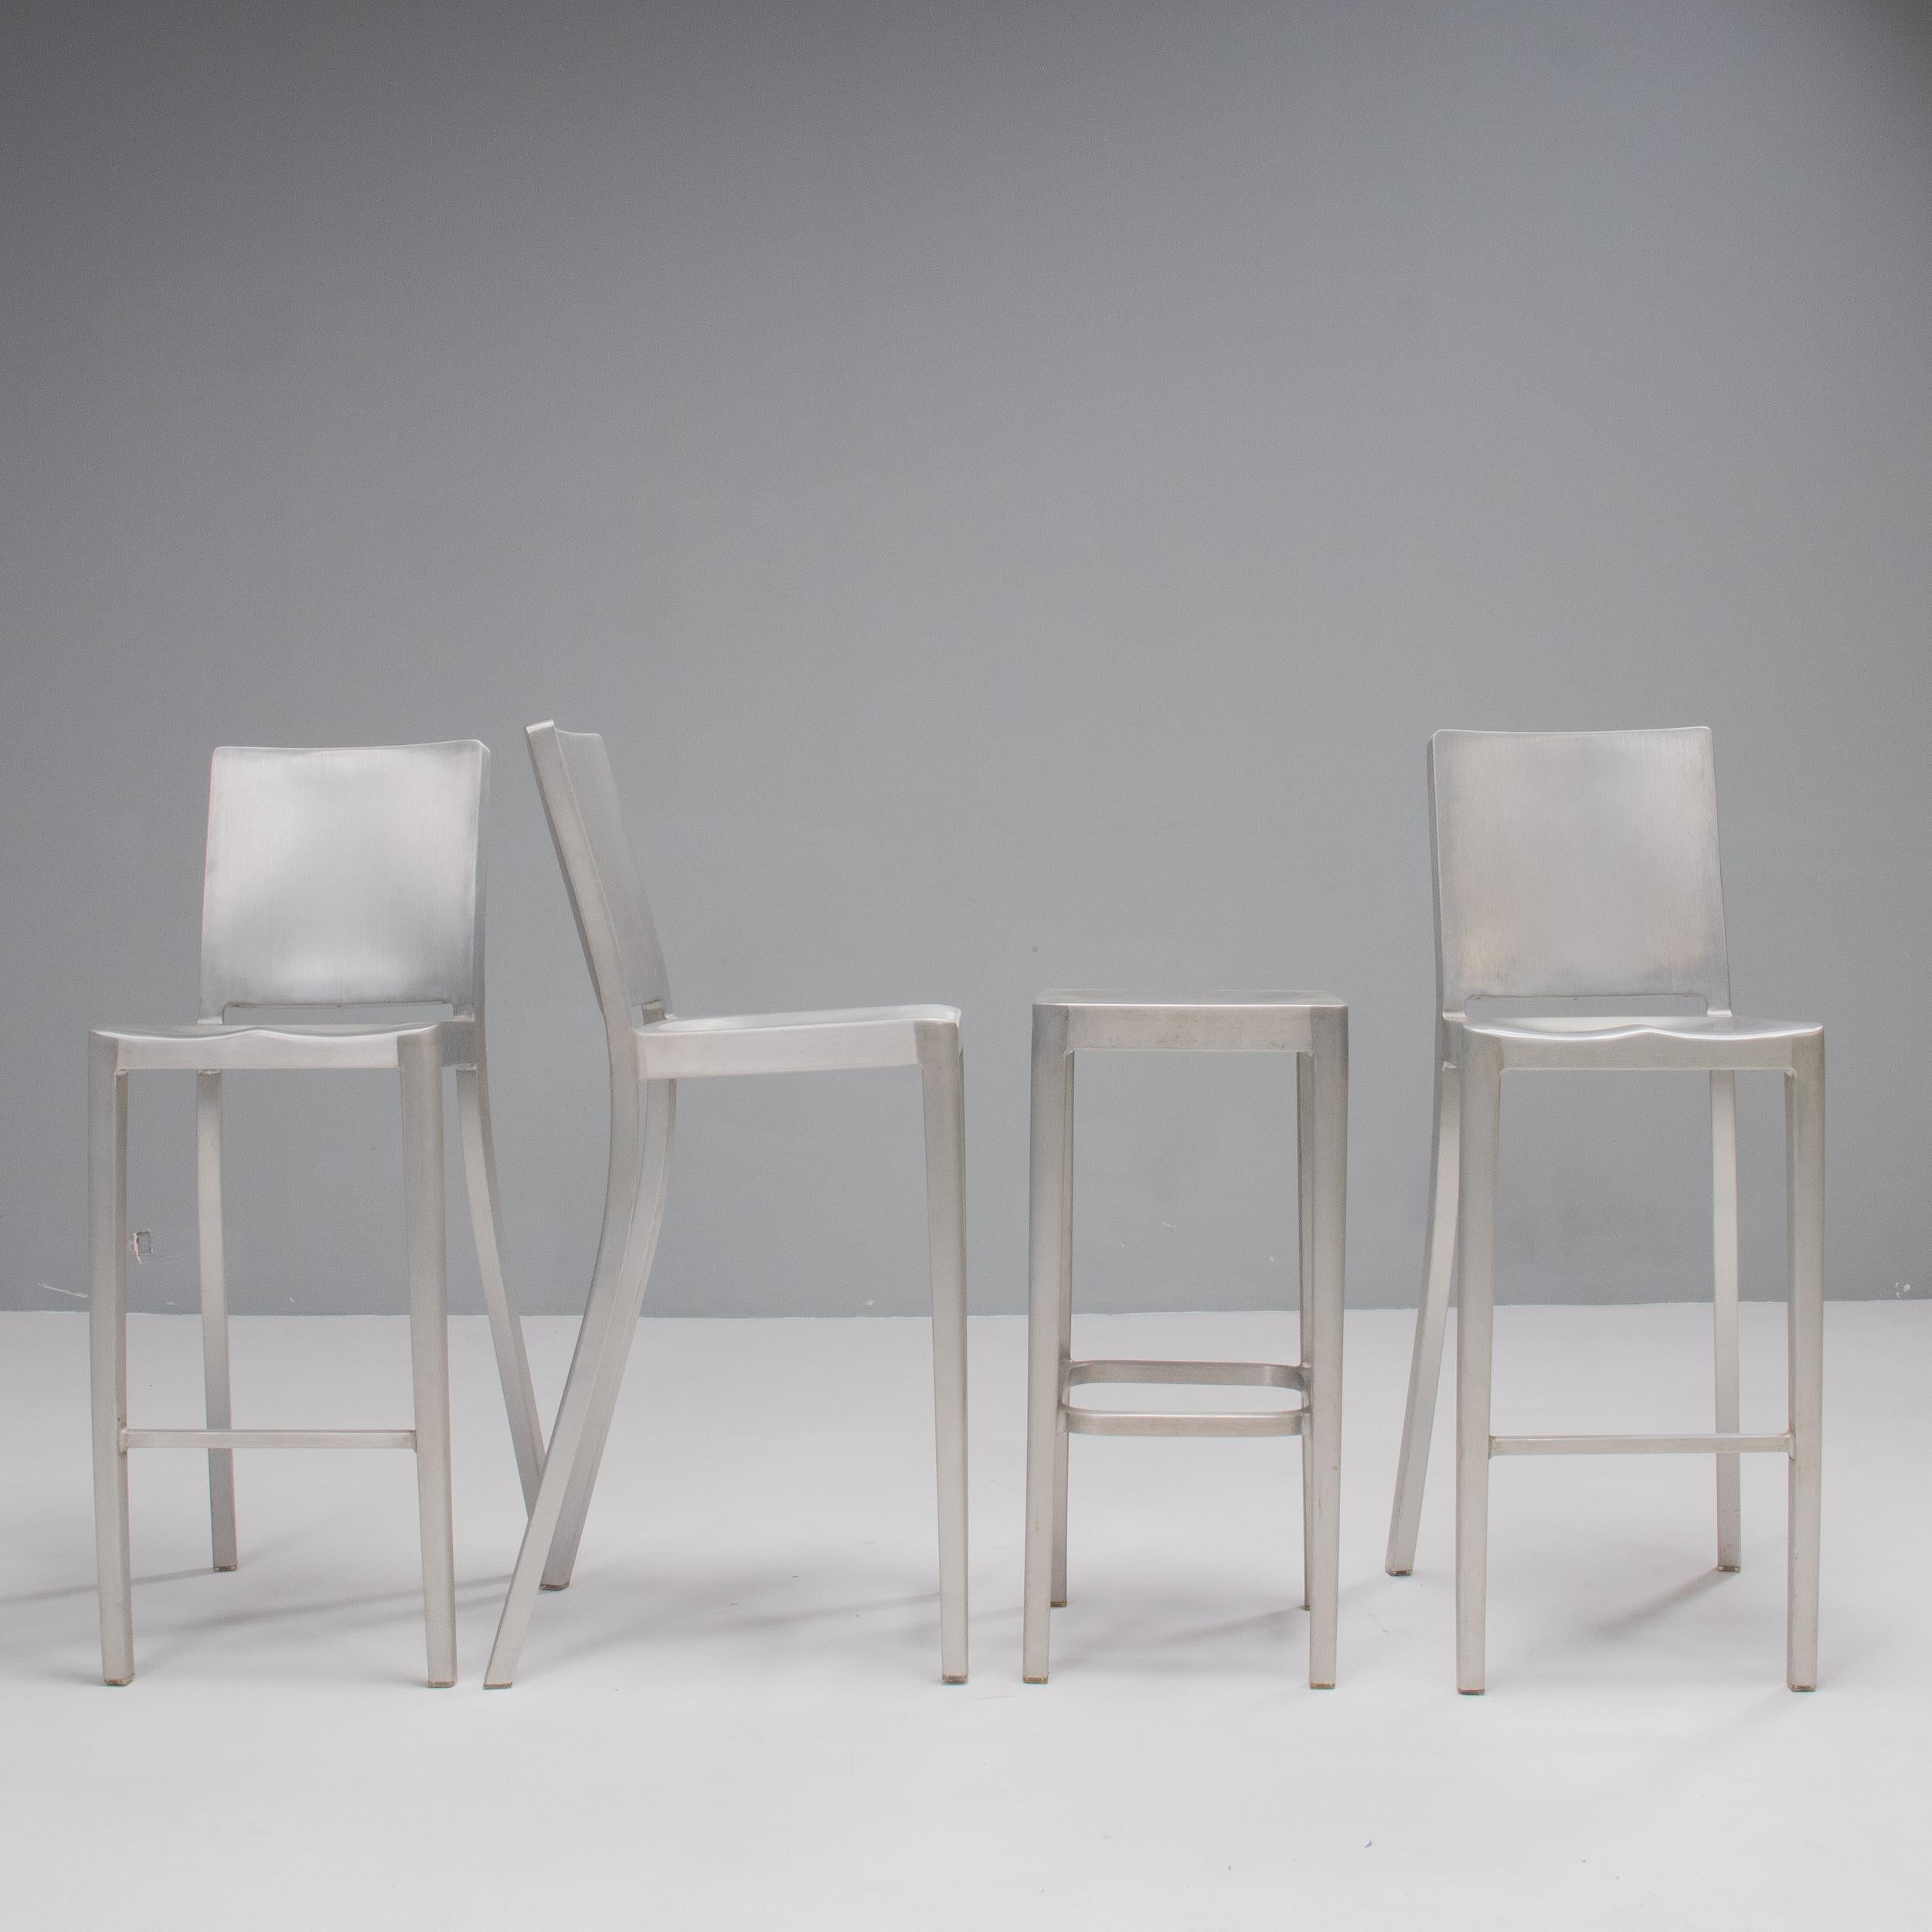 Designed by Philippe Starck for Emeco, this set of stools comprises of three Hudon bar stools and one Emeco bar stool.

The Hudson bar stool was the first collaboration between Starck and Emeco and was originally designed for the Hudson Hotel in